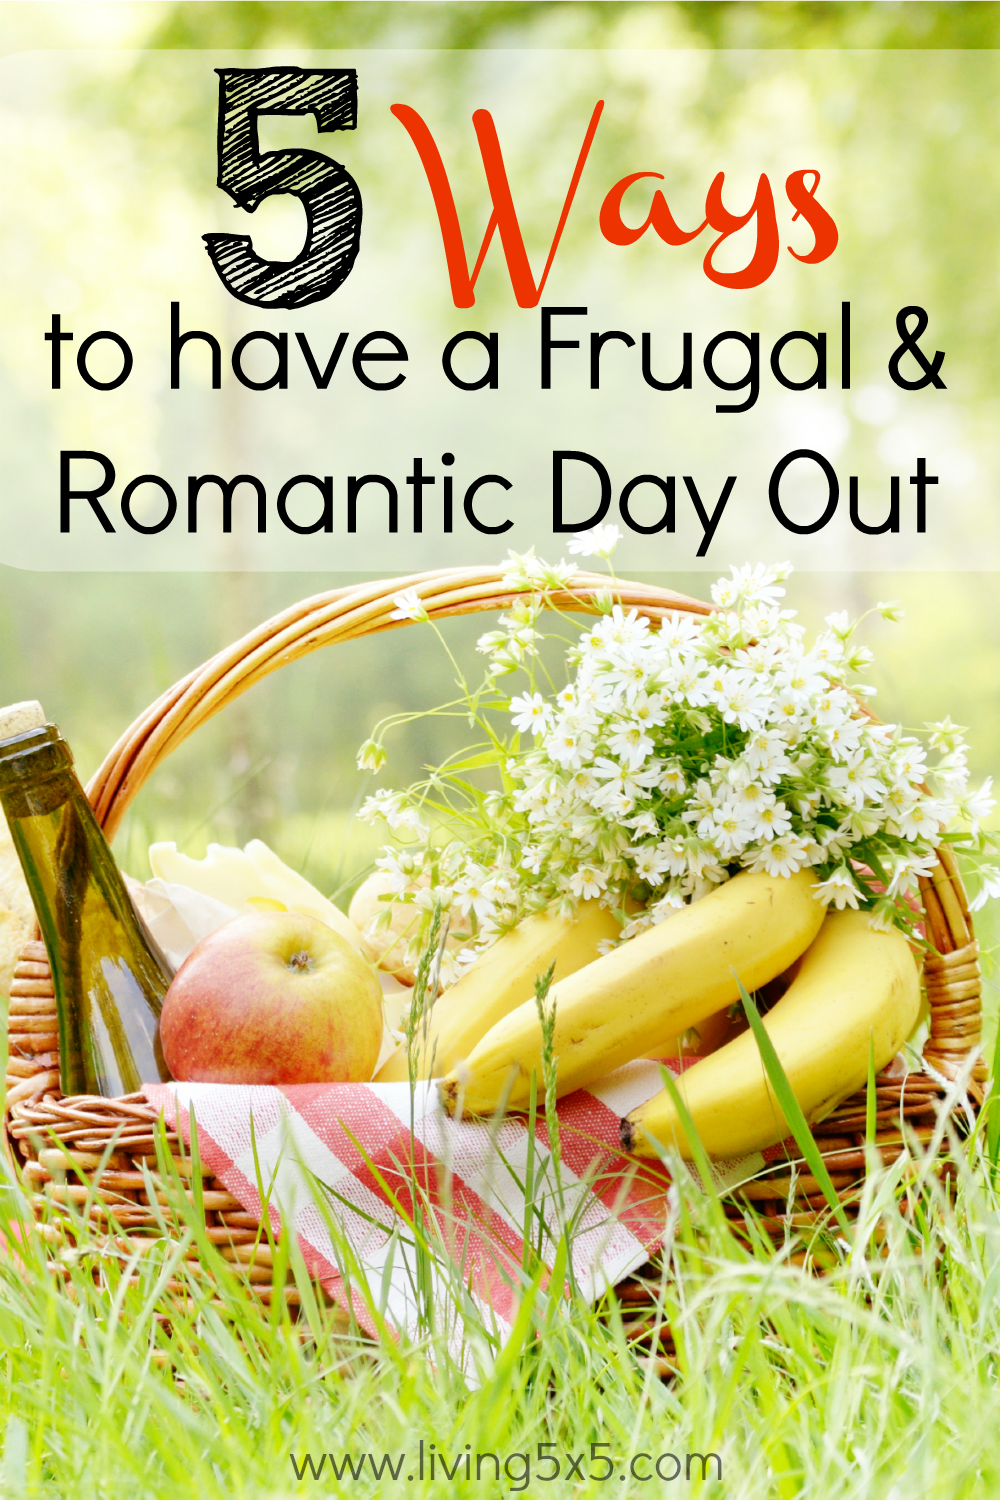 When times are rough, you can still enjoy A Frugal and Romantic Day Out. Here are some clever ideas!